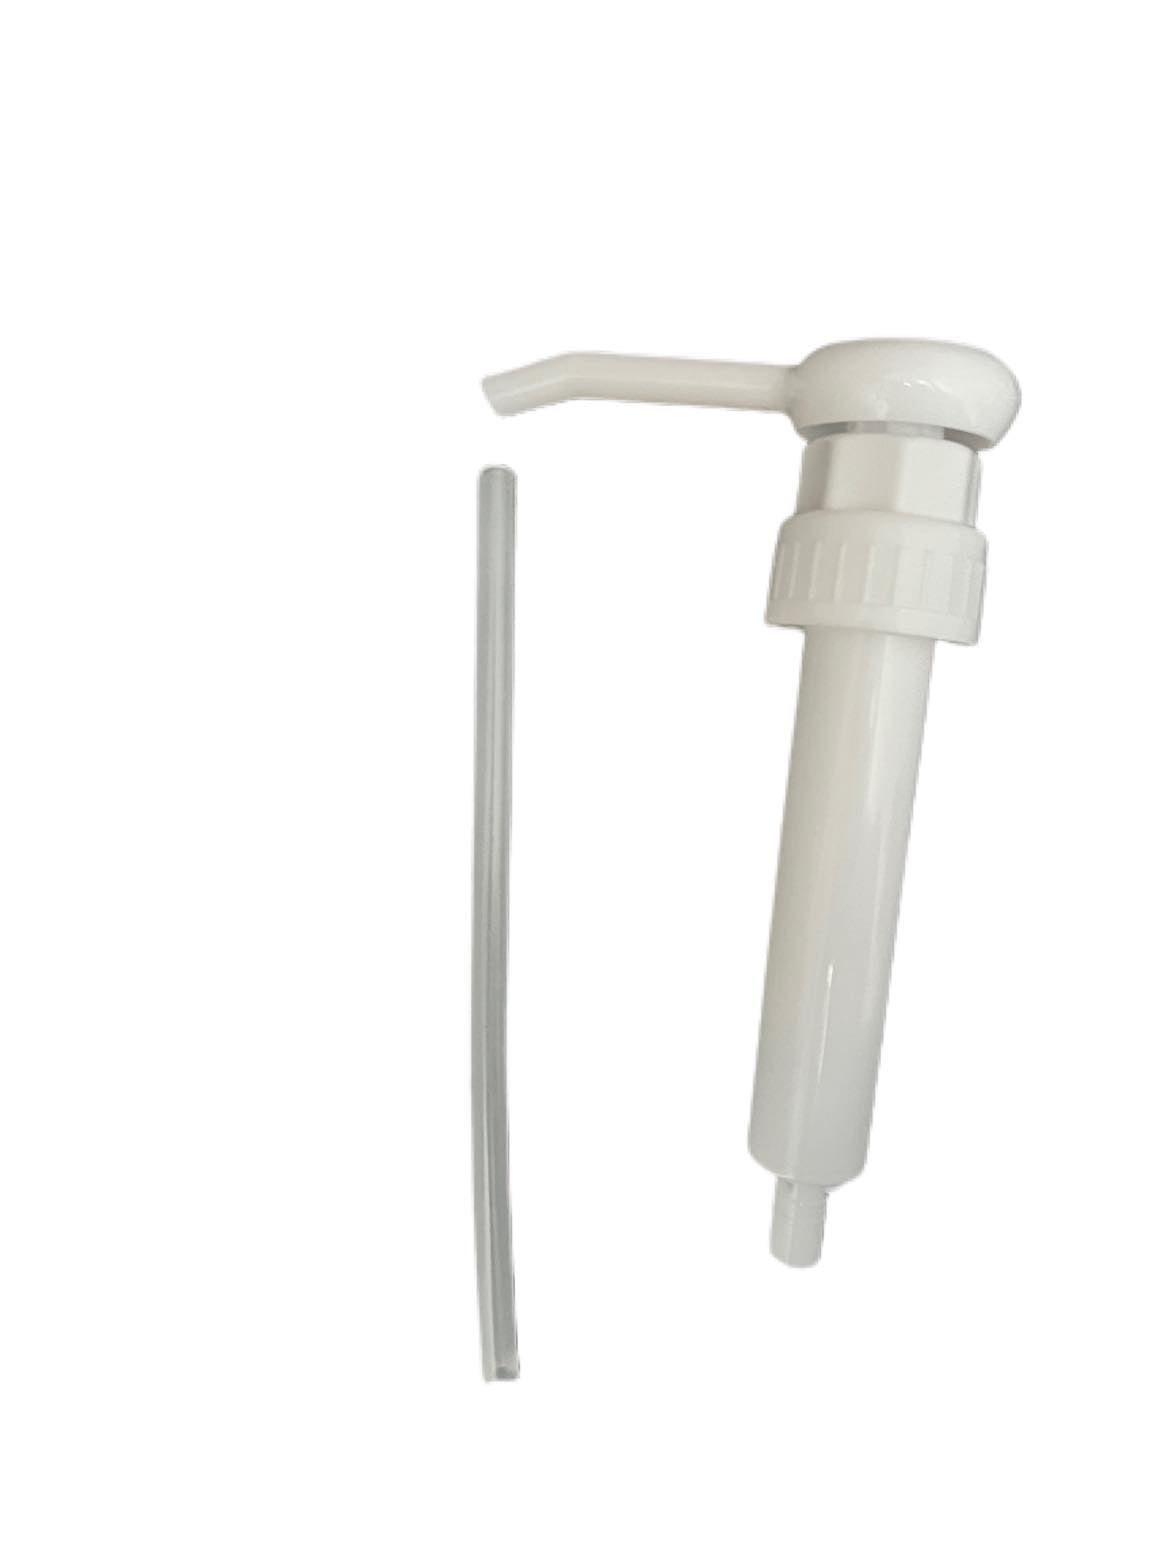 Lotion and Wash Pump attachment for 2.5/5L bottles